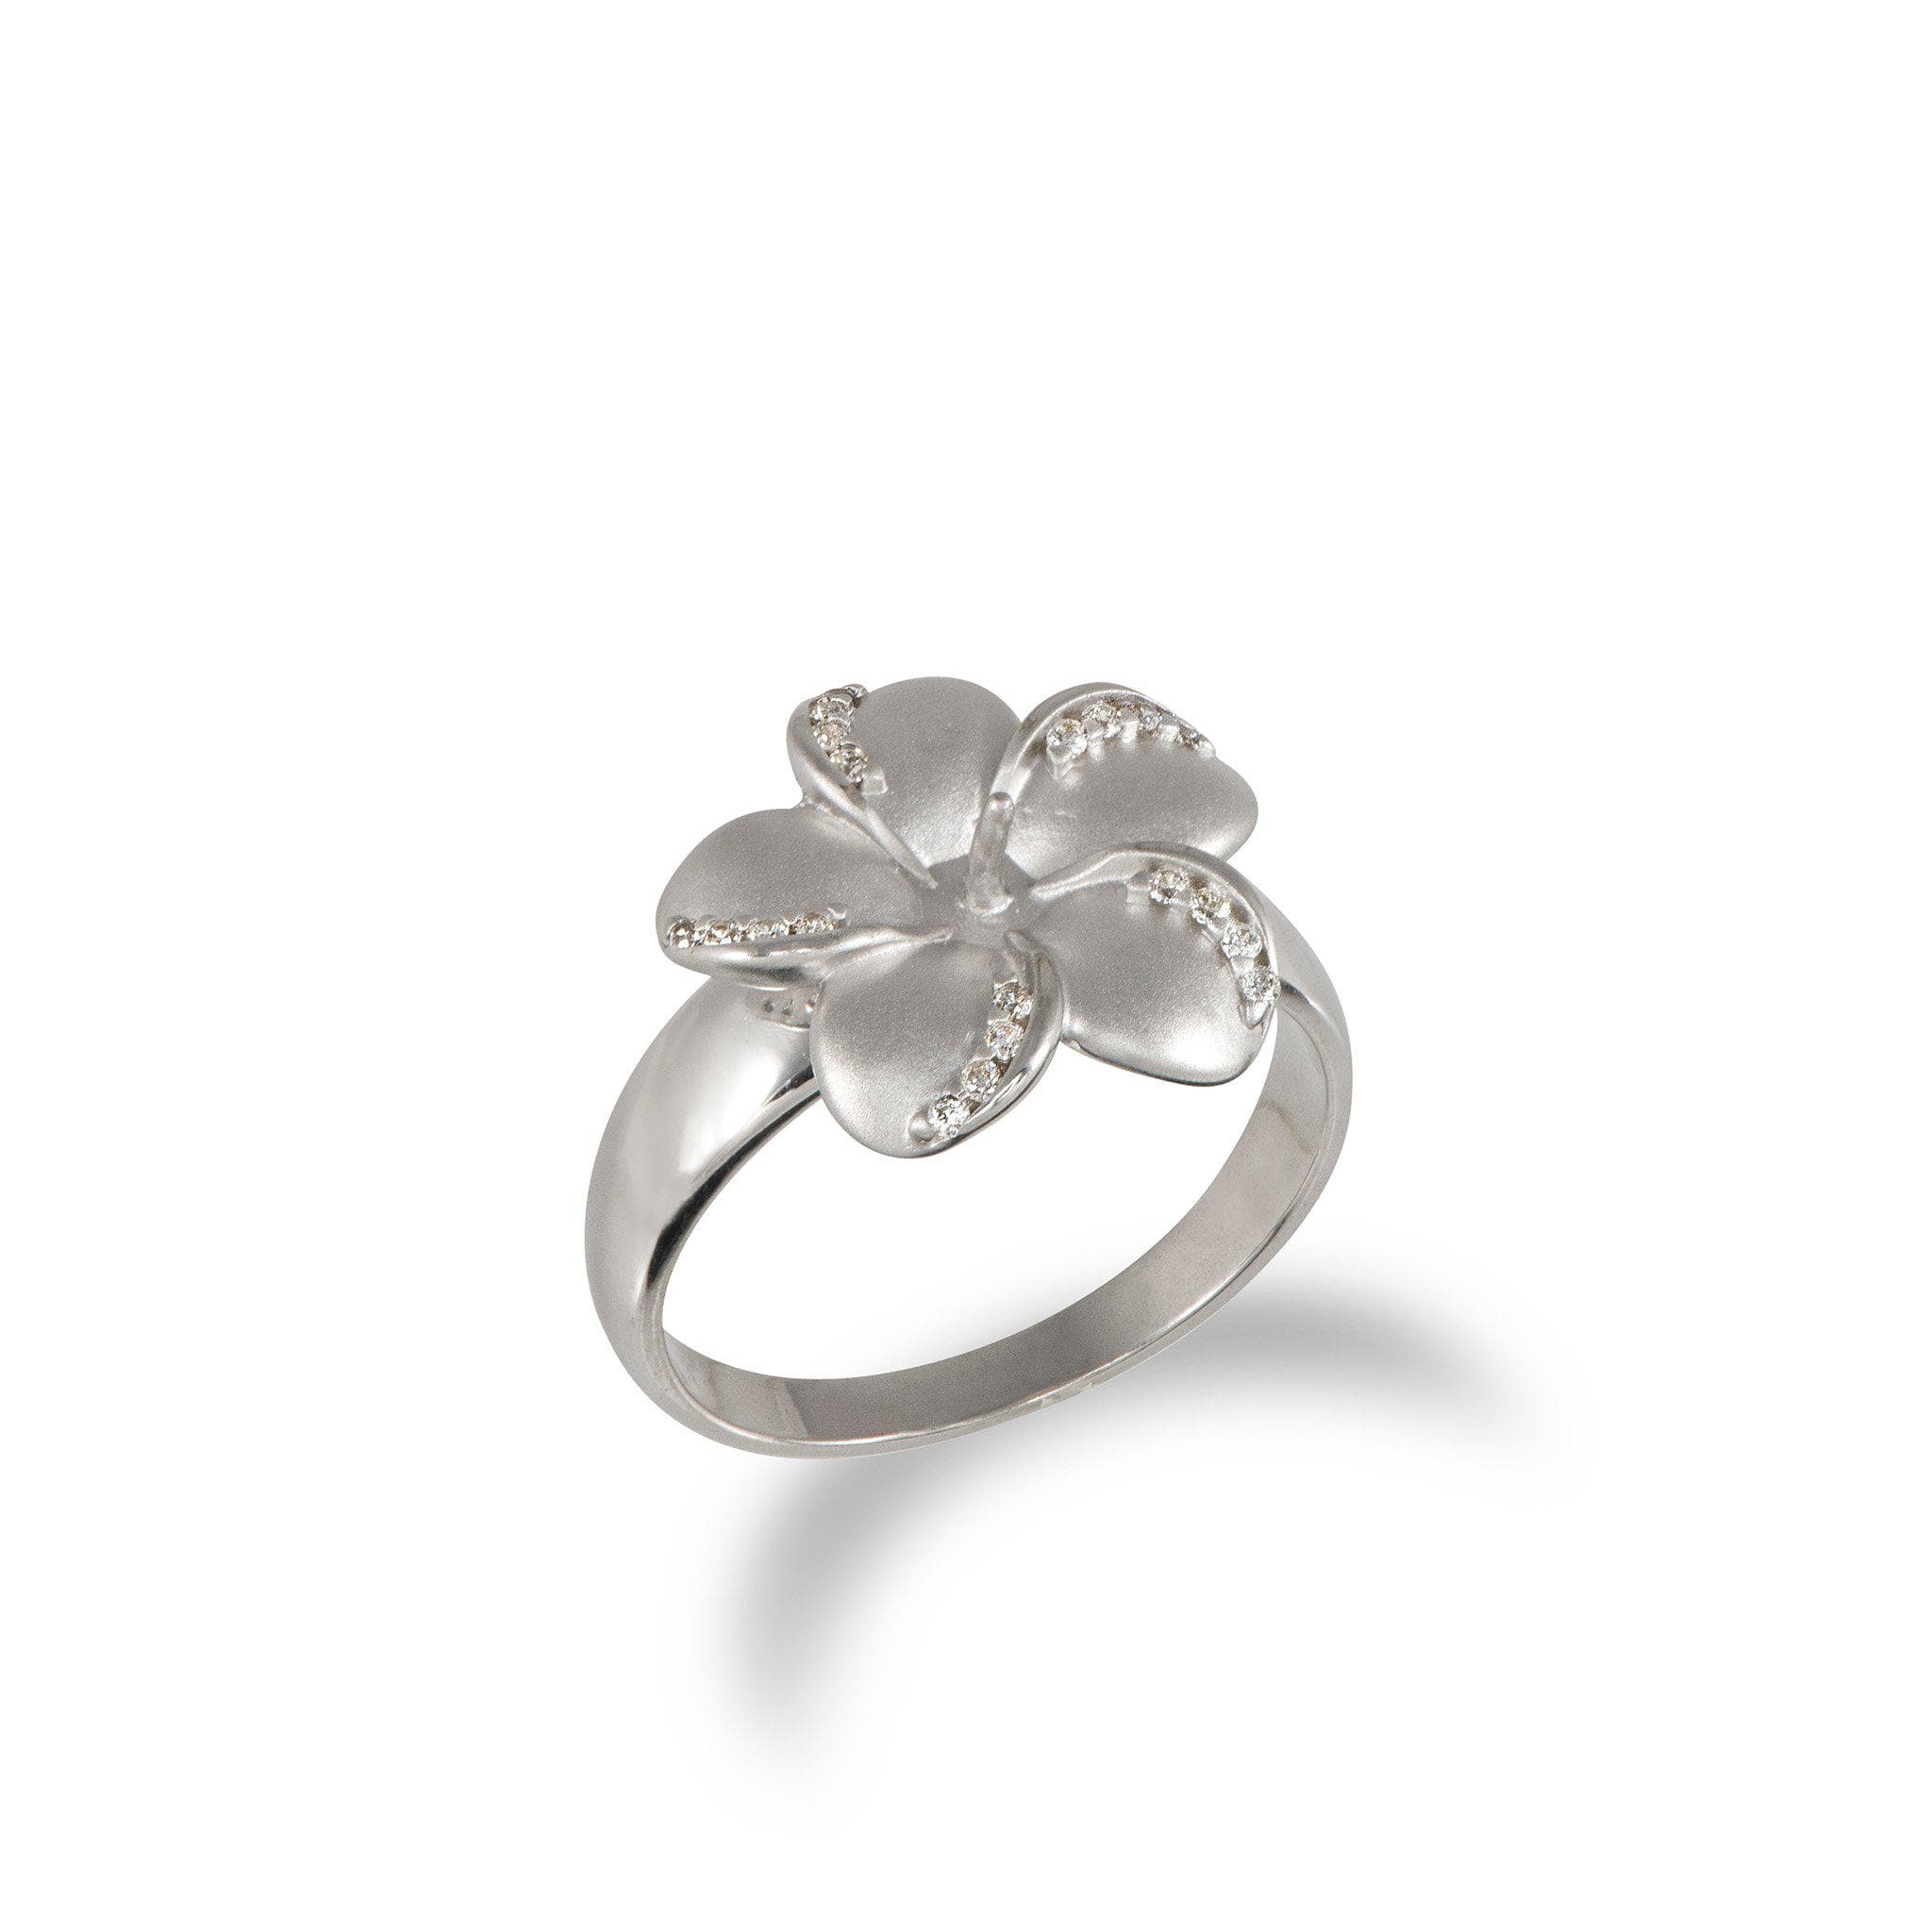 Plumeria Ring in Sterling Silver with CZs - Maui Divers Jewelry